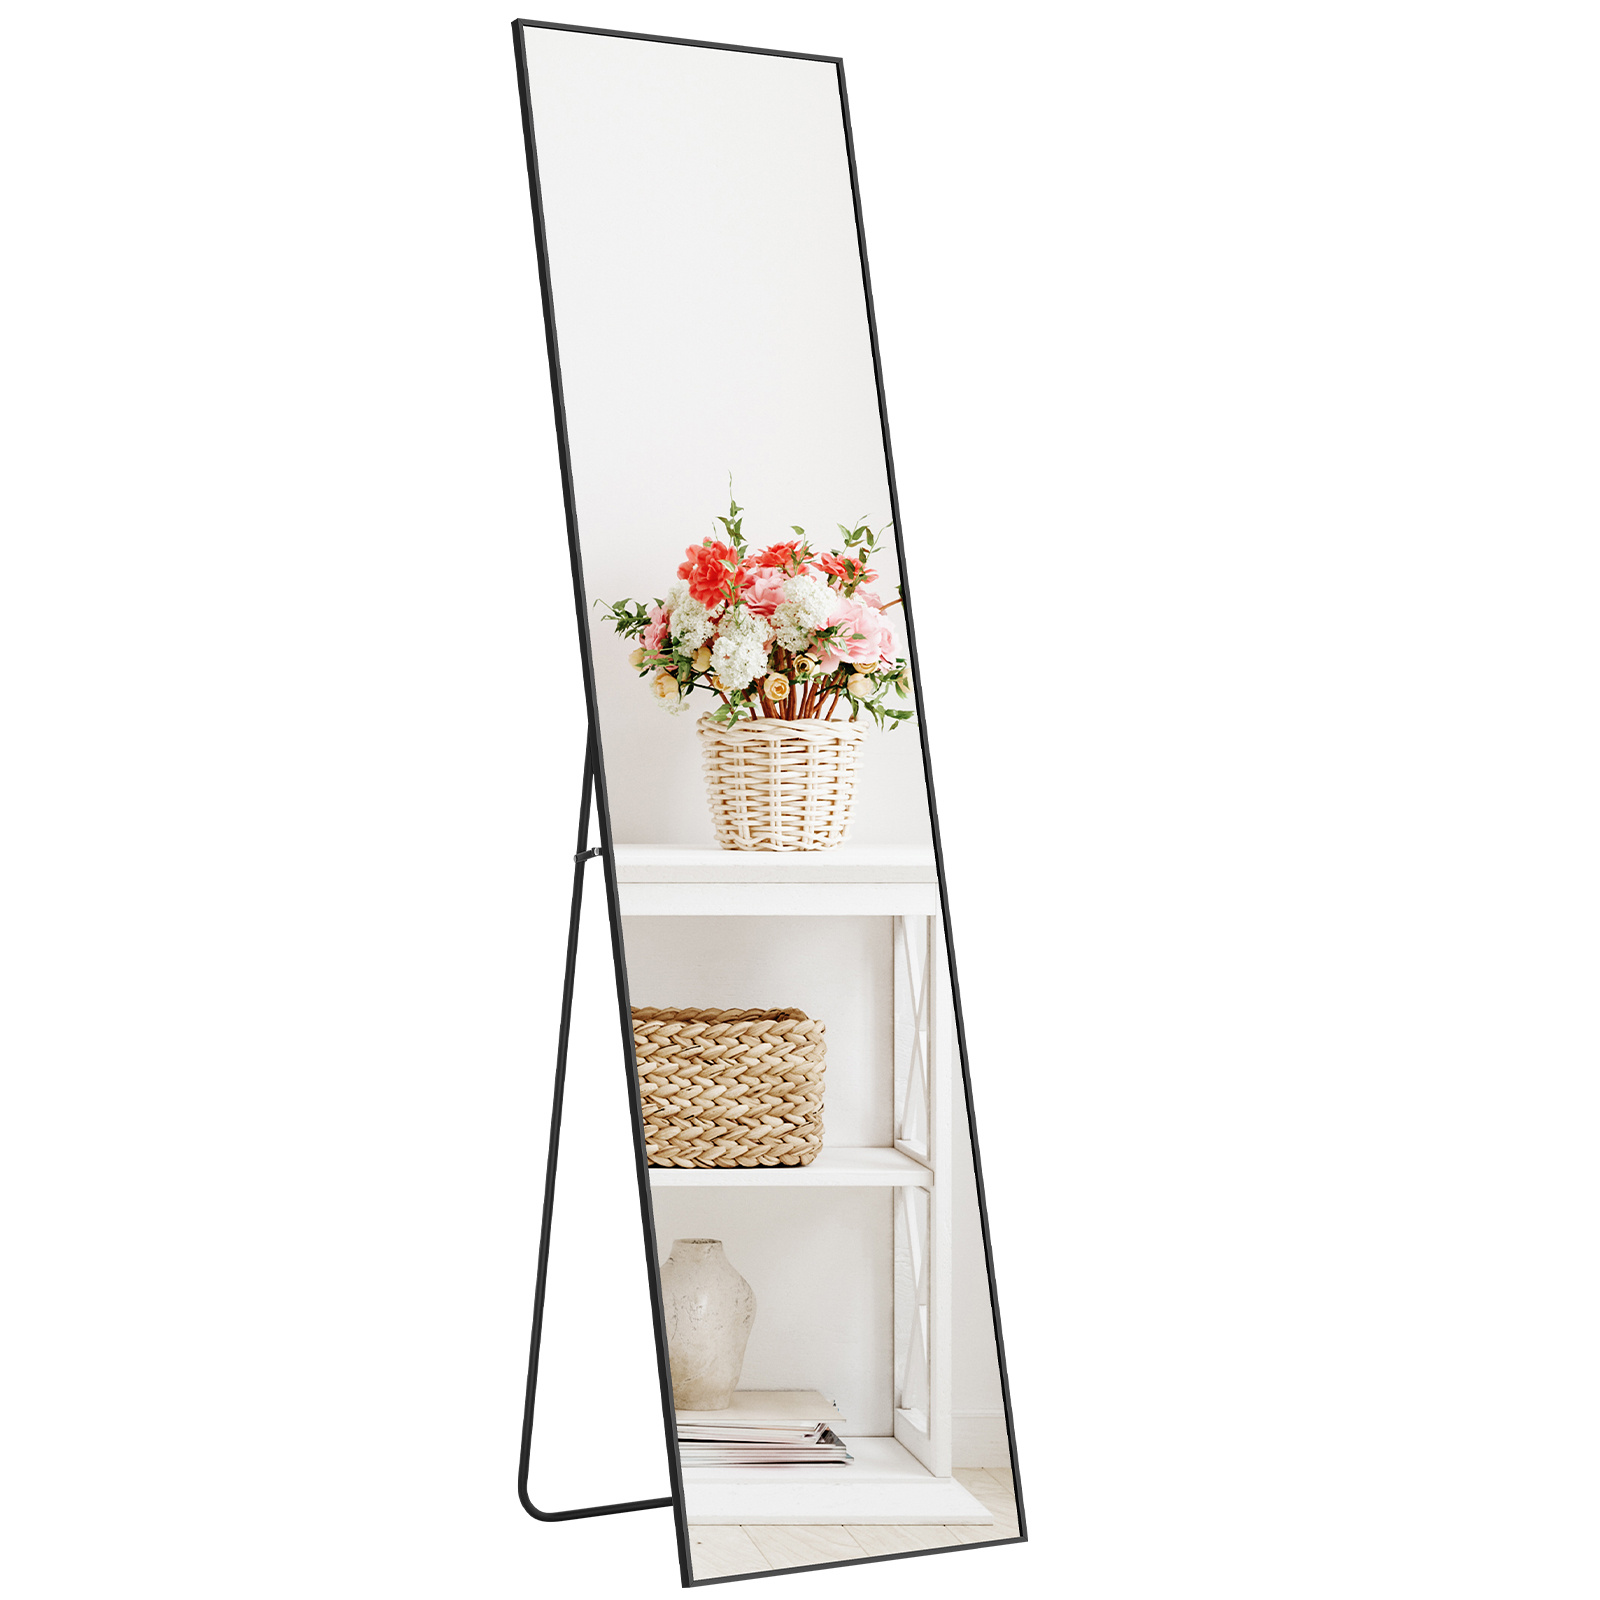 

59"x16" Glamorous Arched/rectangular Full Length Floor Mirror,wall Mounted Mirror Hanging Or Leaning, Arched Floor Mirror For Living Room Cloakroom